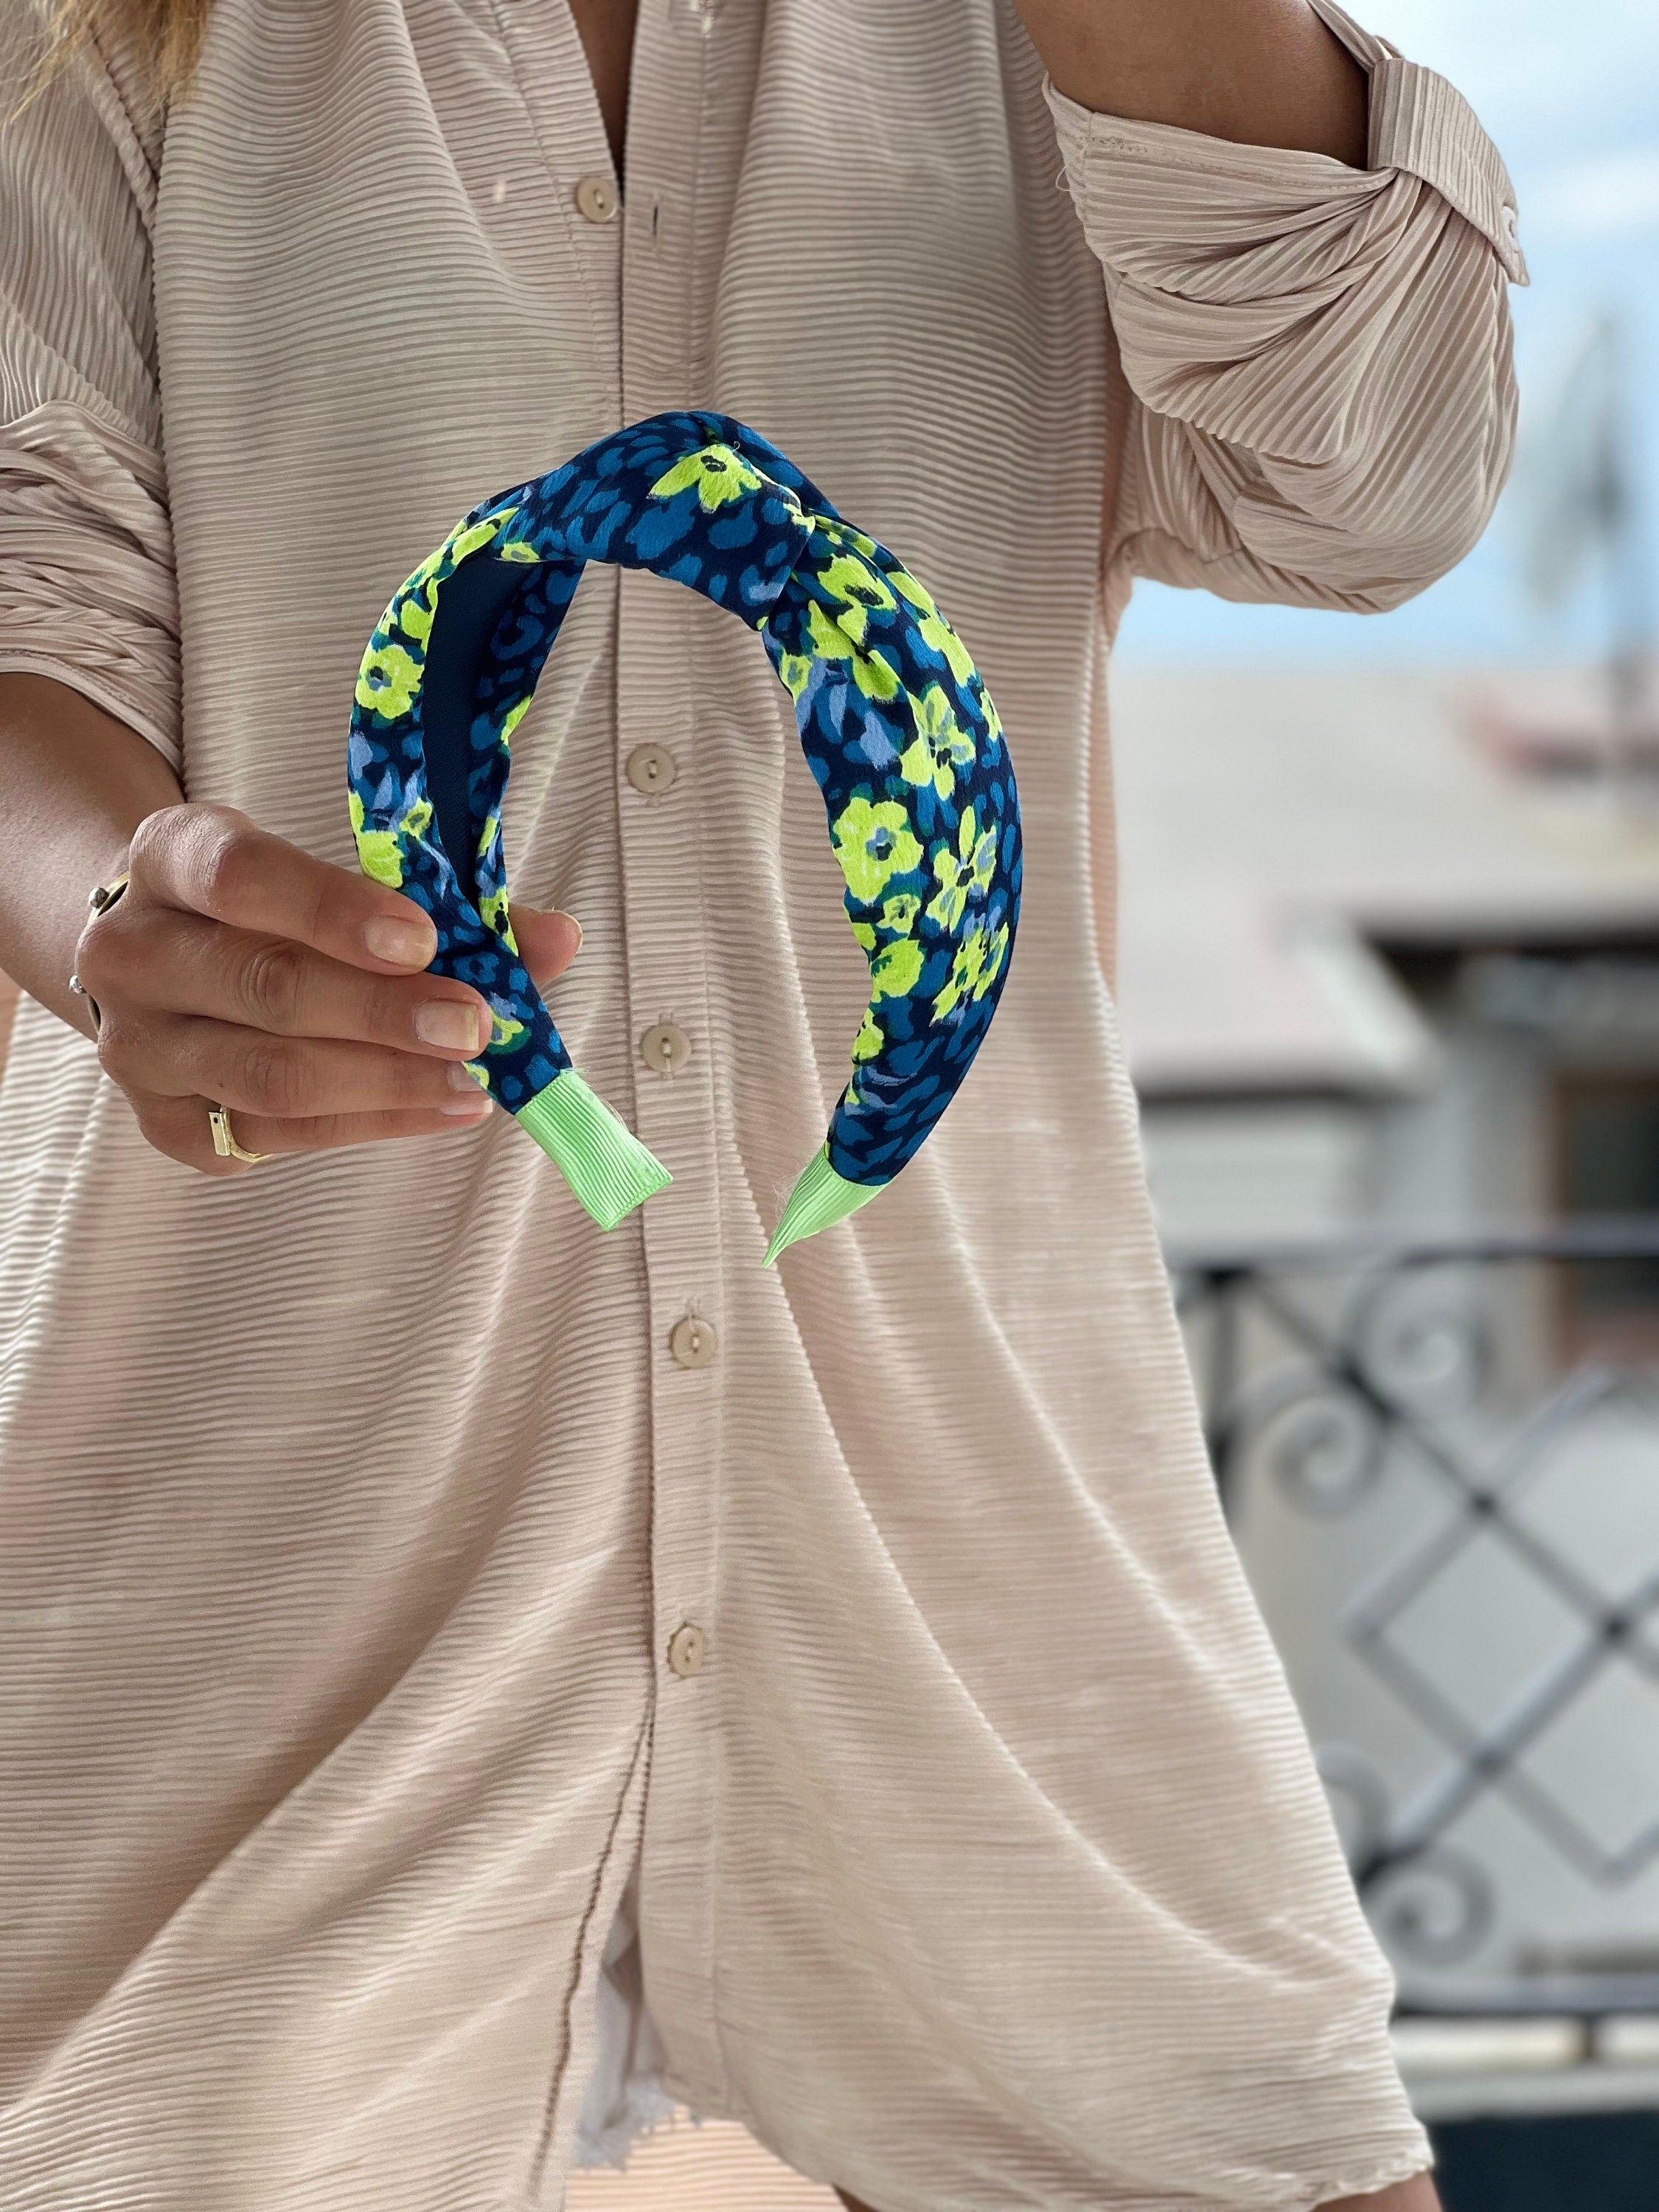 A stunning Blue, Bright Pink, and Green Headband made of soft and comfortable fabric.